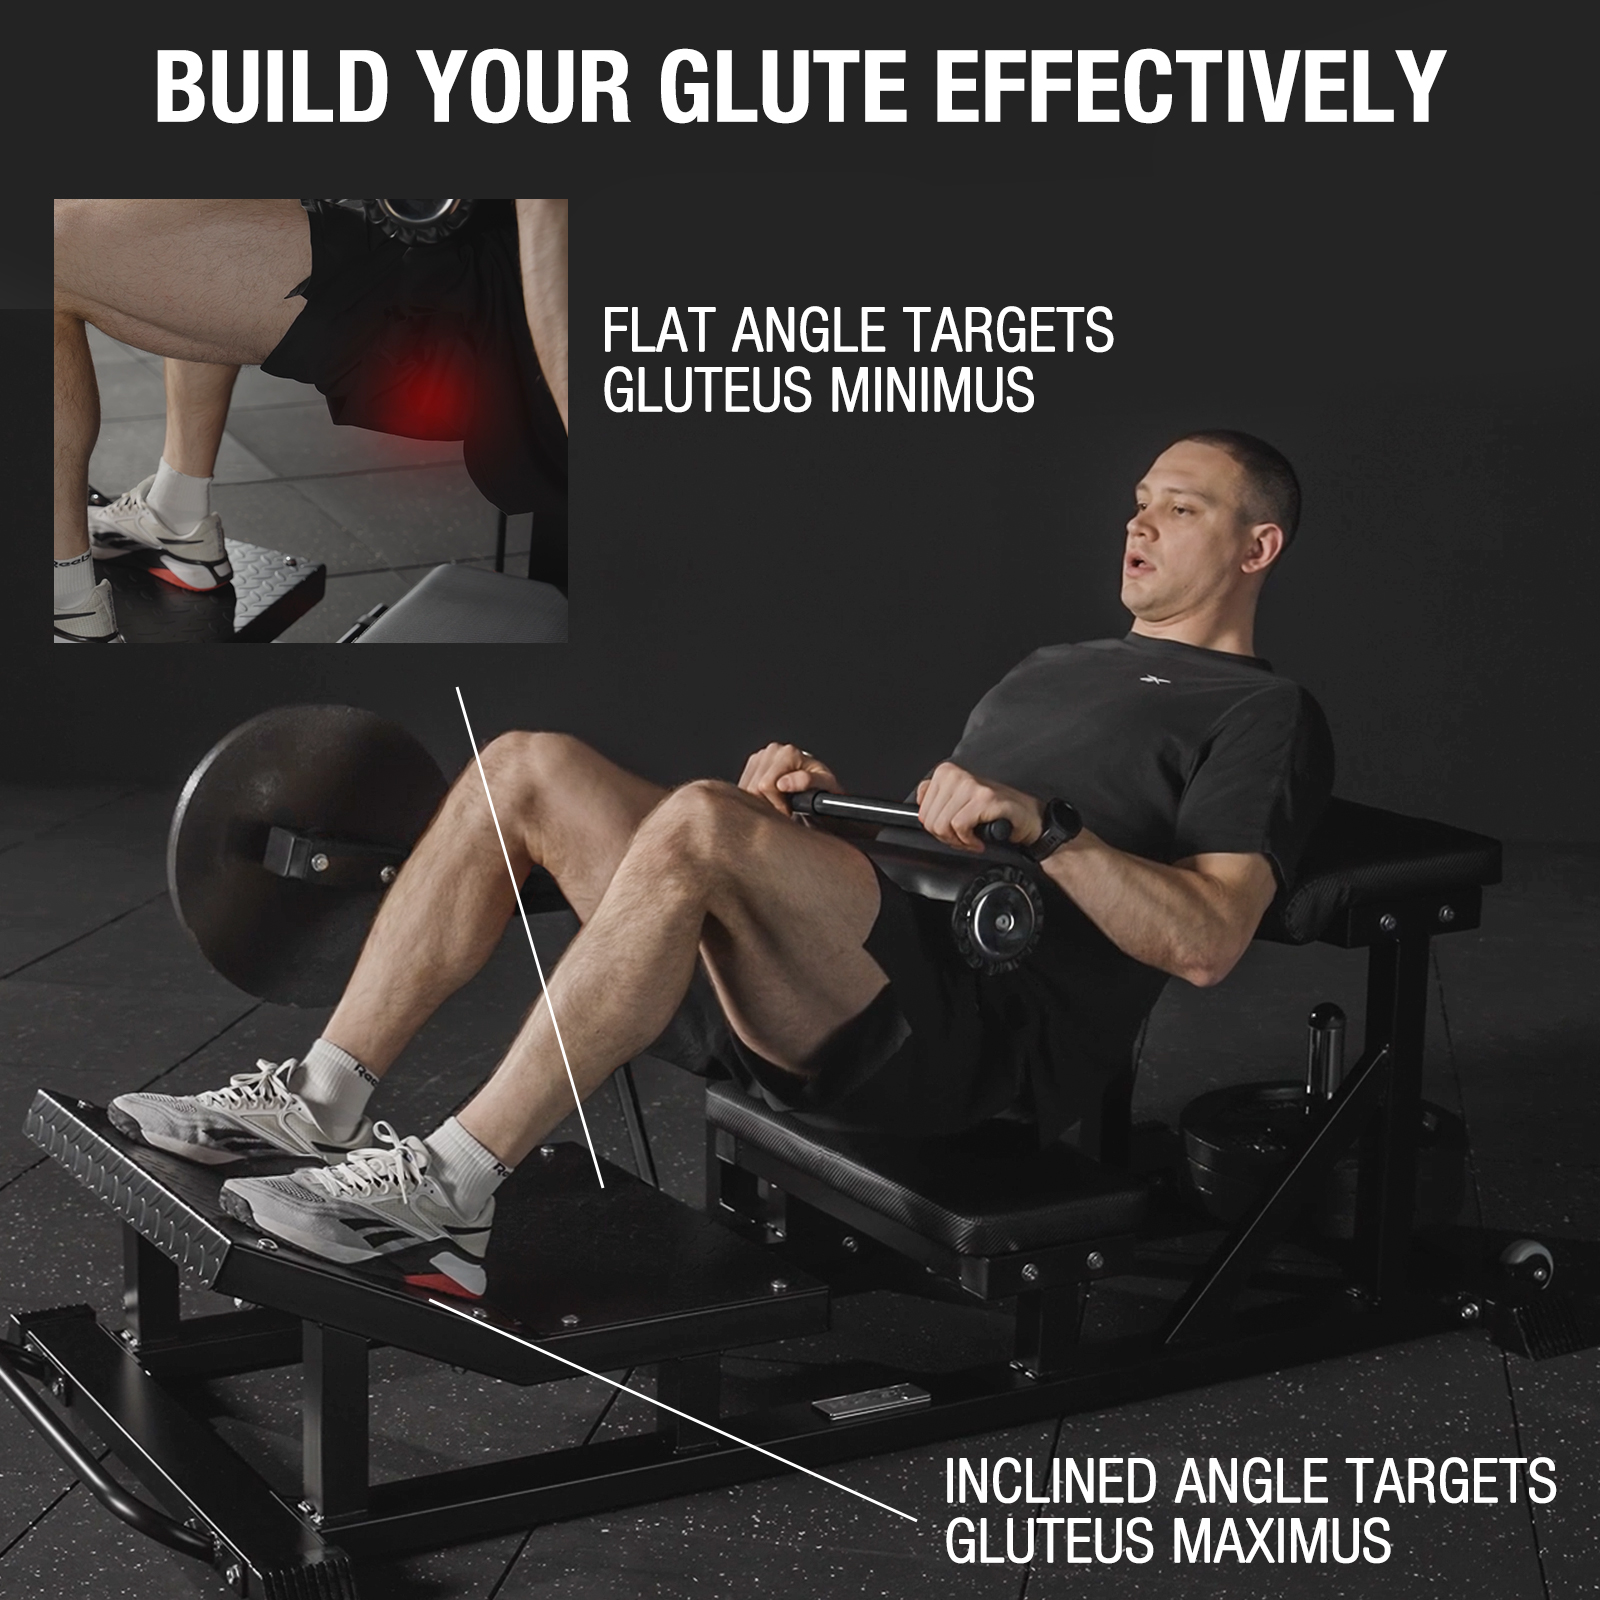 syedee Glute Bridge Machine, Heavy Duty Plate-Loaded Hip Thrust Machine, Glute Drive Machine for Glute Muscles Shaping(Black) - image 2 of 7